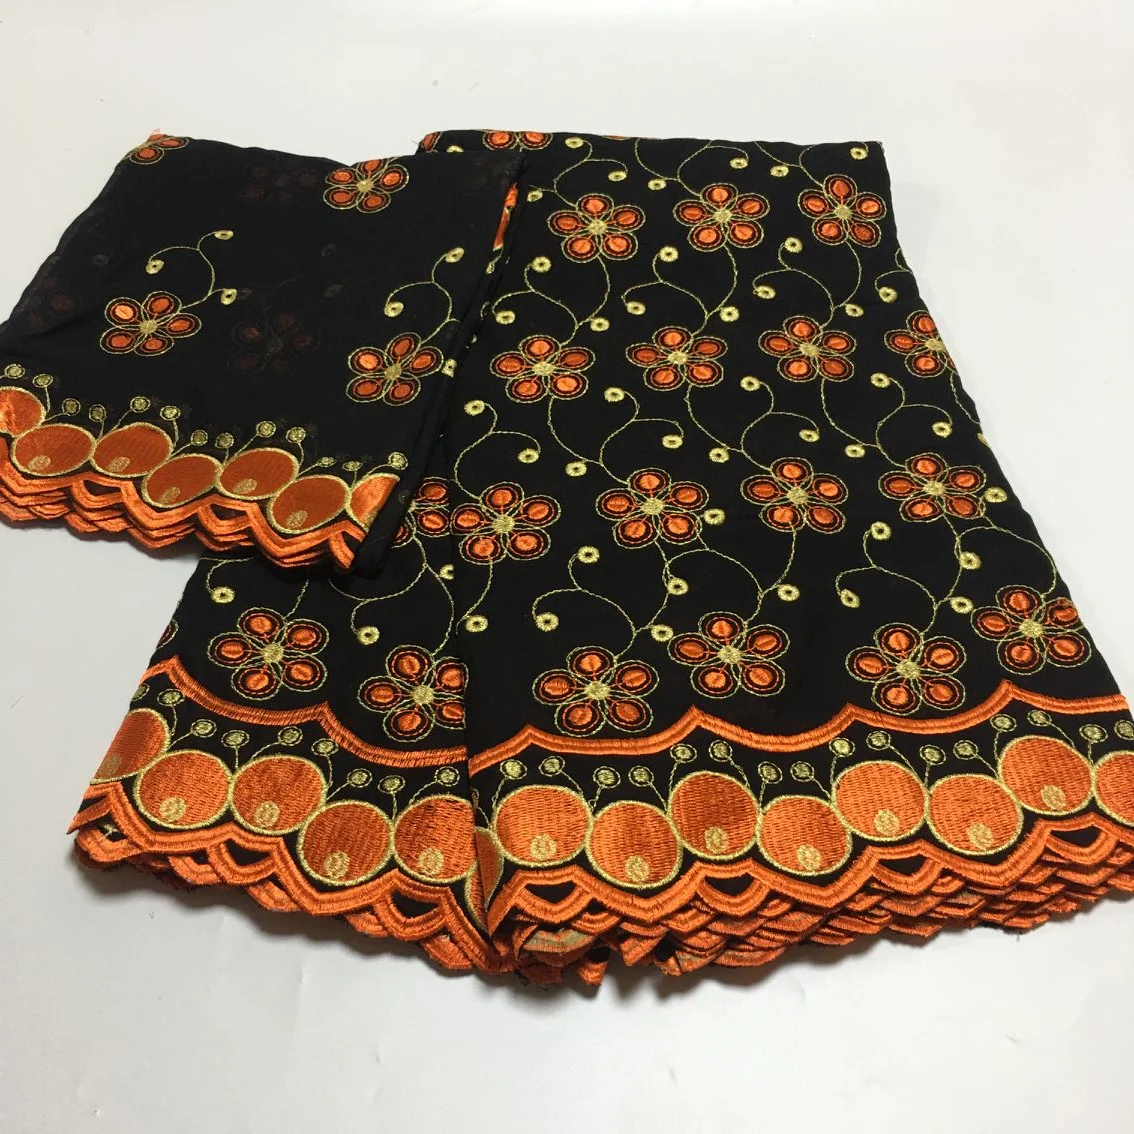 2022 New Arrivals African Fashion Dubai Quality Swiss Cotton Voile Dry Lace Fabric Embroidered in Switzerland Material 5+2Yards